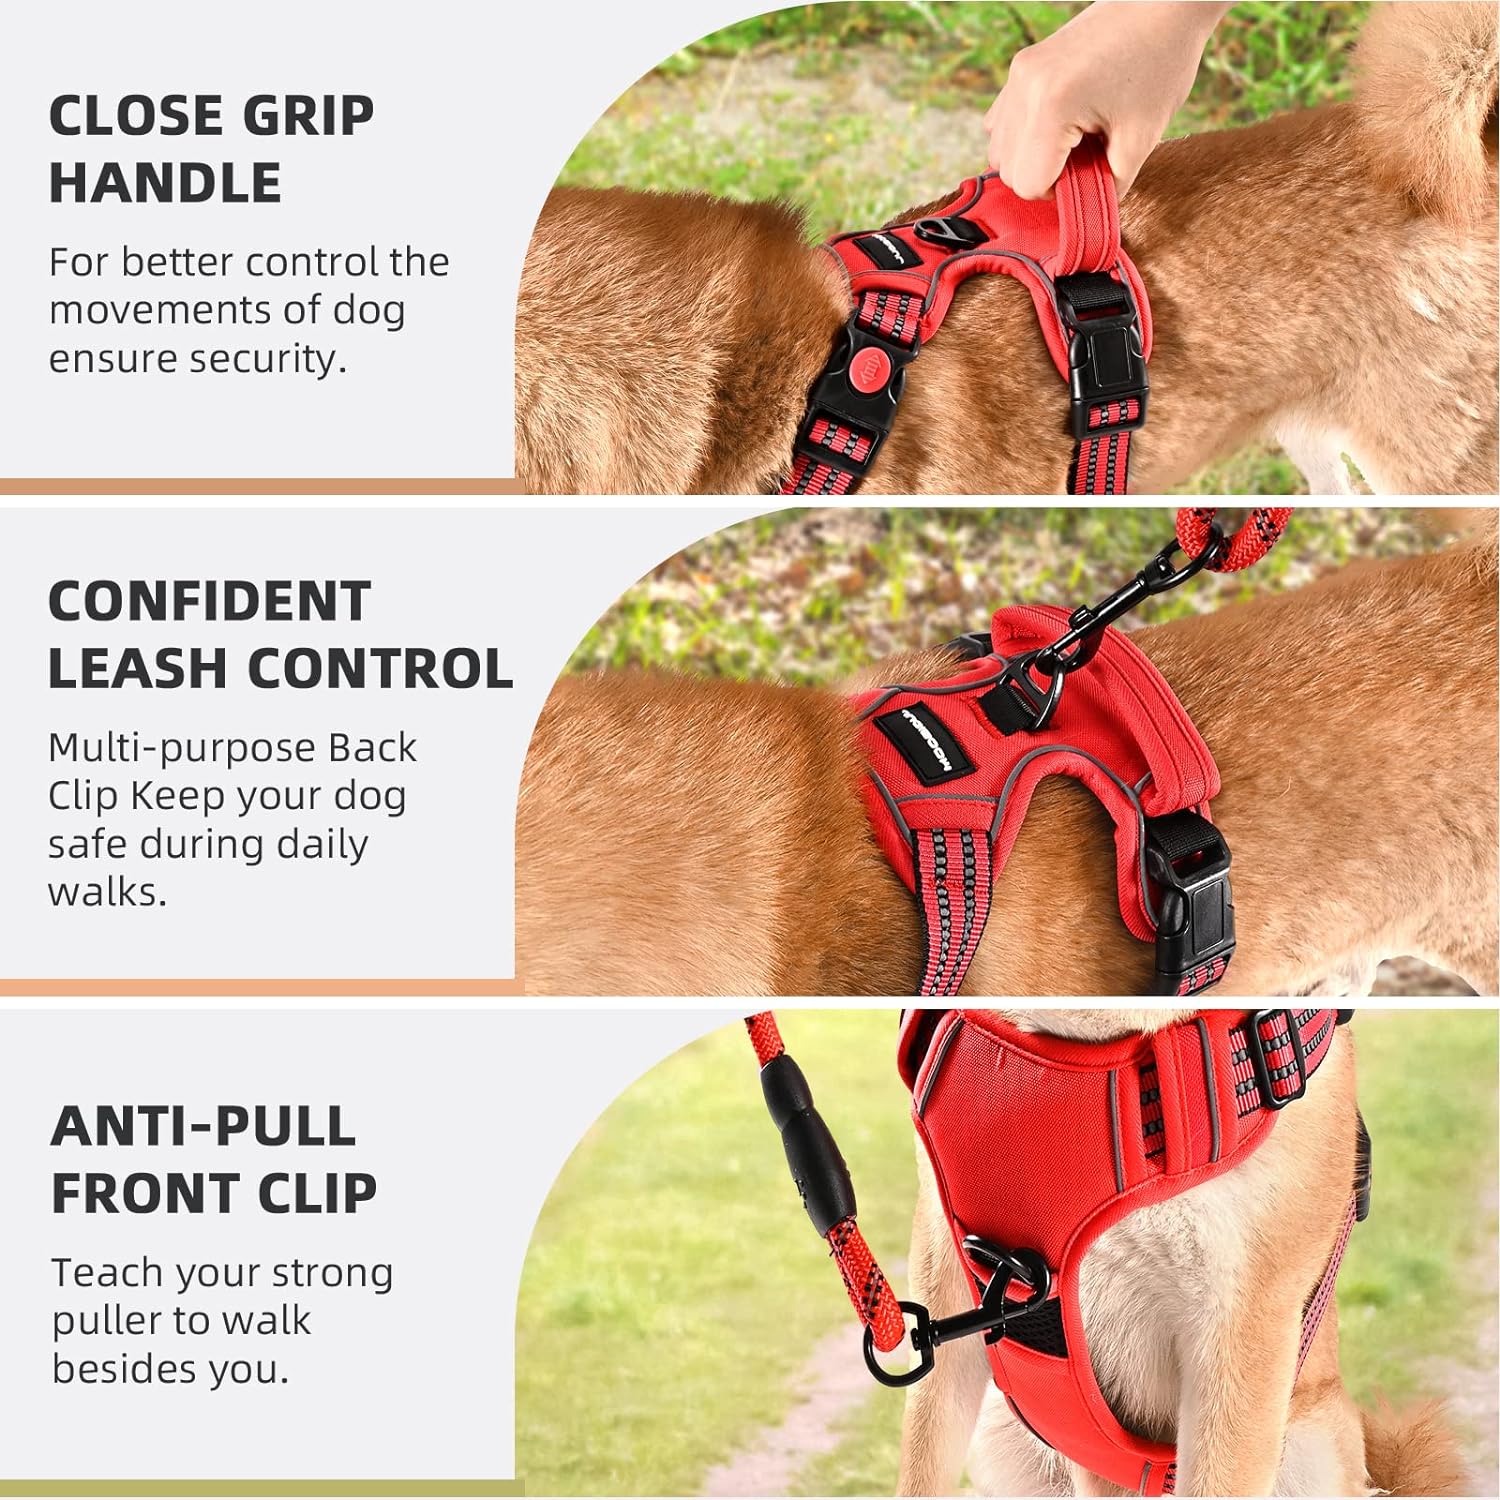 No Pull Dog Harness with A Free Heavy Duty 5ft Dog Leash, Adjustable Soft Padded Dog Vest, Reflective No-Choke Pet Oxford Vest with Easy Control Handle for Dogs(Orange, Medium)